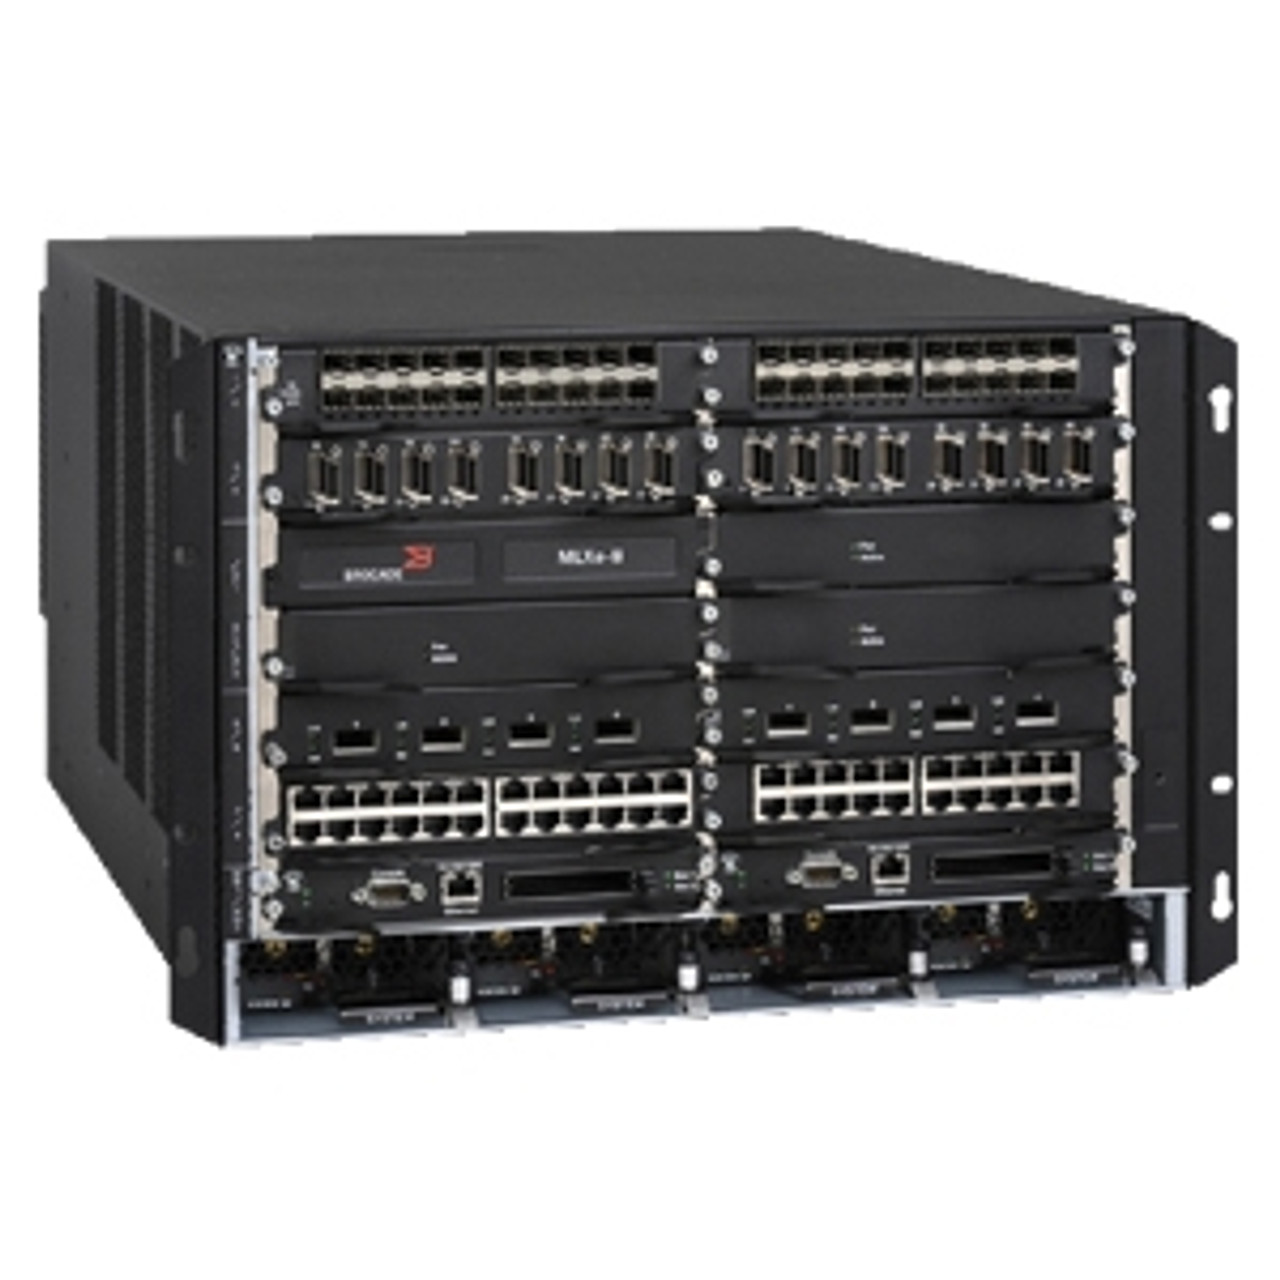 BR-MLXE-8-DC Brocade MLXe-8 8 x Expansion Slots Multi Service Router (Refurbished)